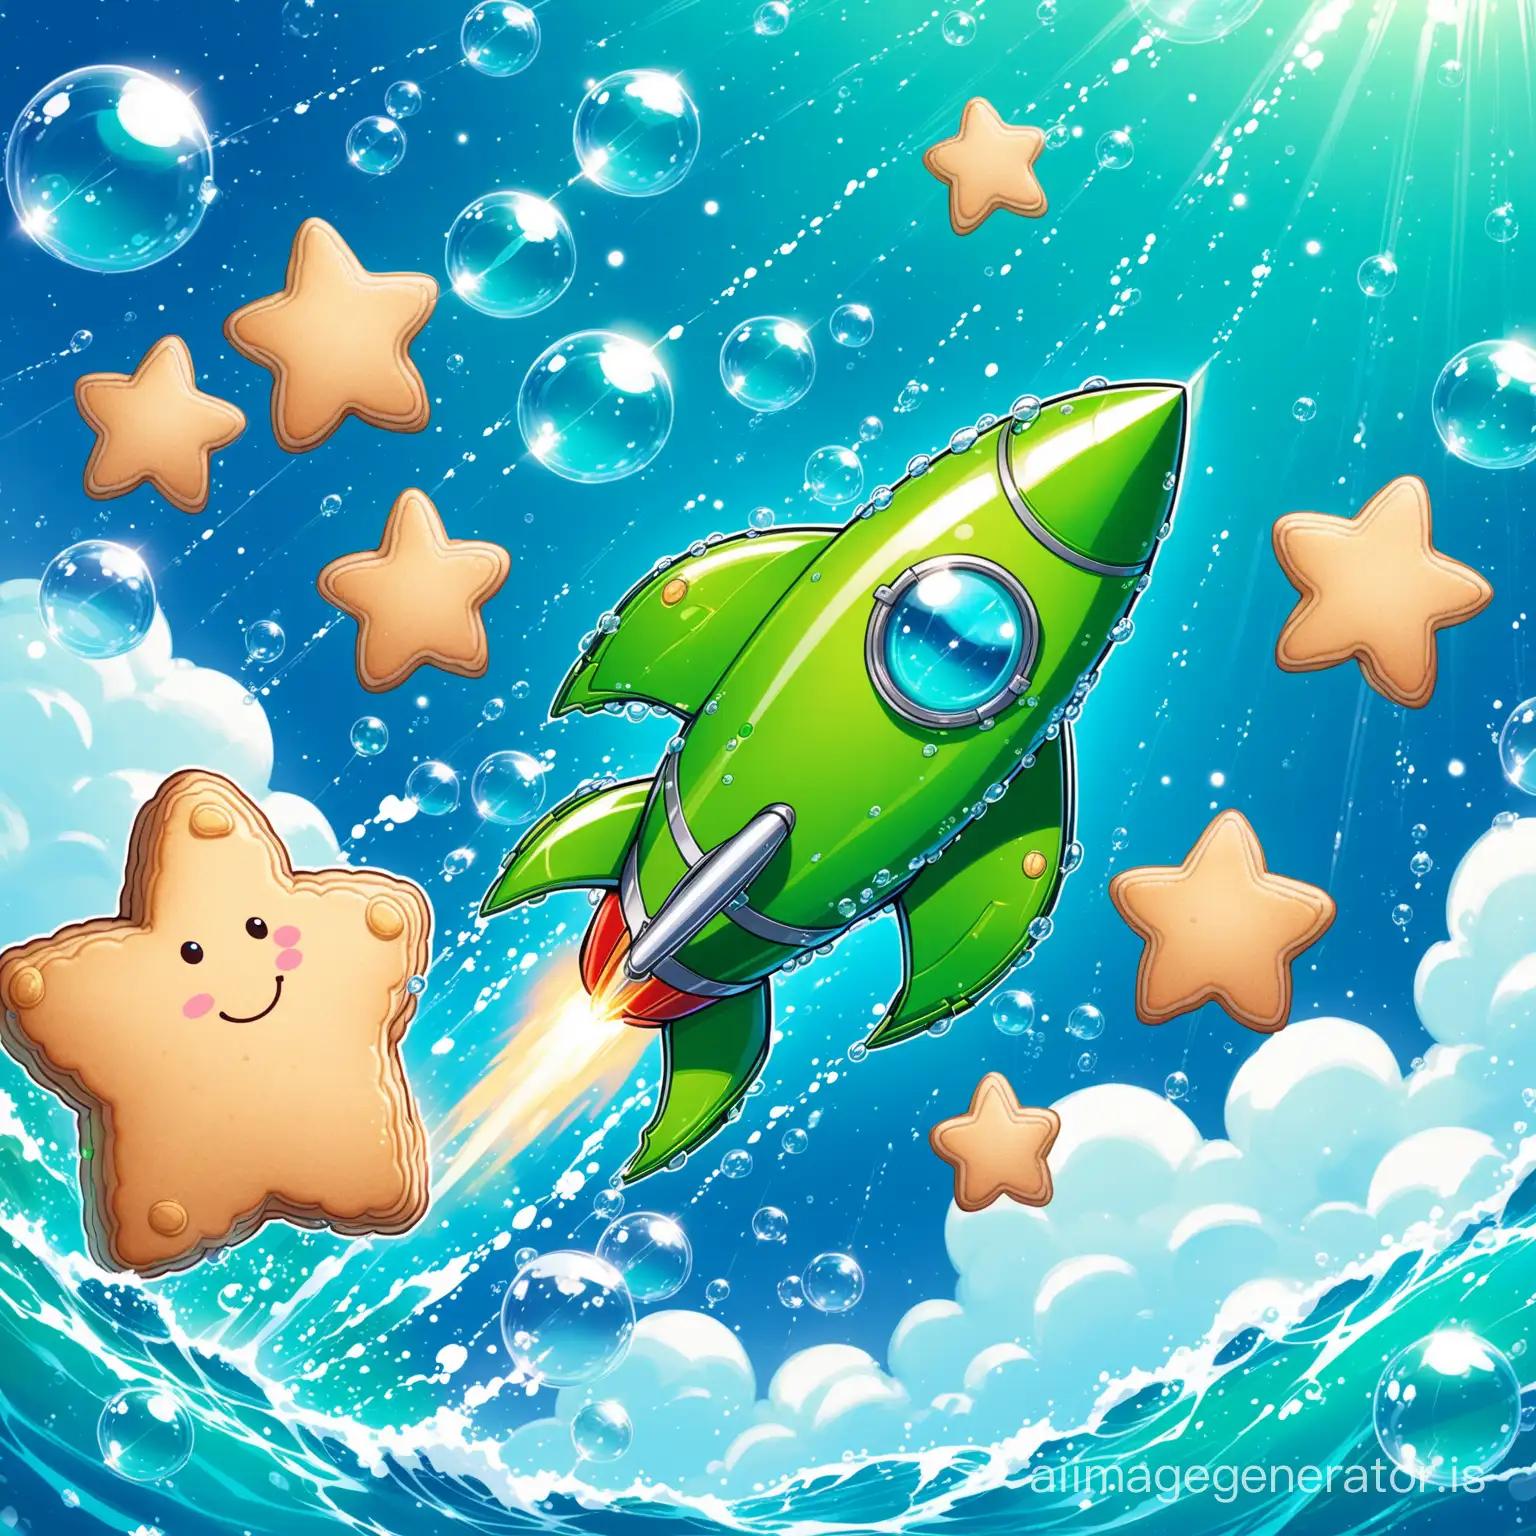 A  happy cute  green rocket  in upper sea
blue bubbles are in sky
also we have  cute cookie rain
Details are evident beautifully and with great precision + high quality